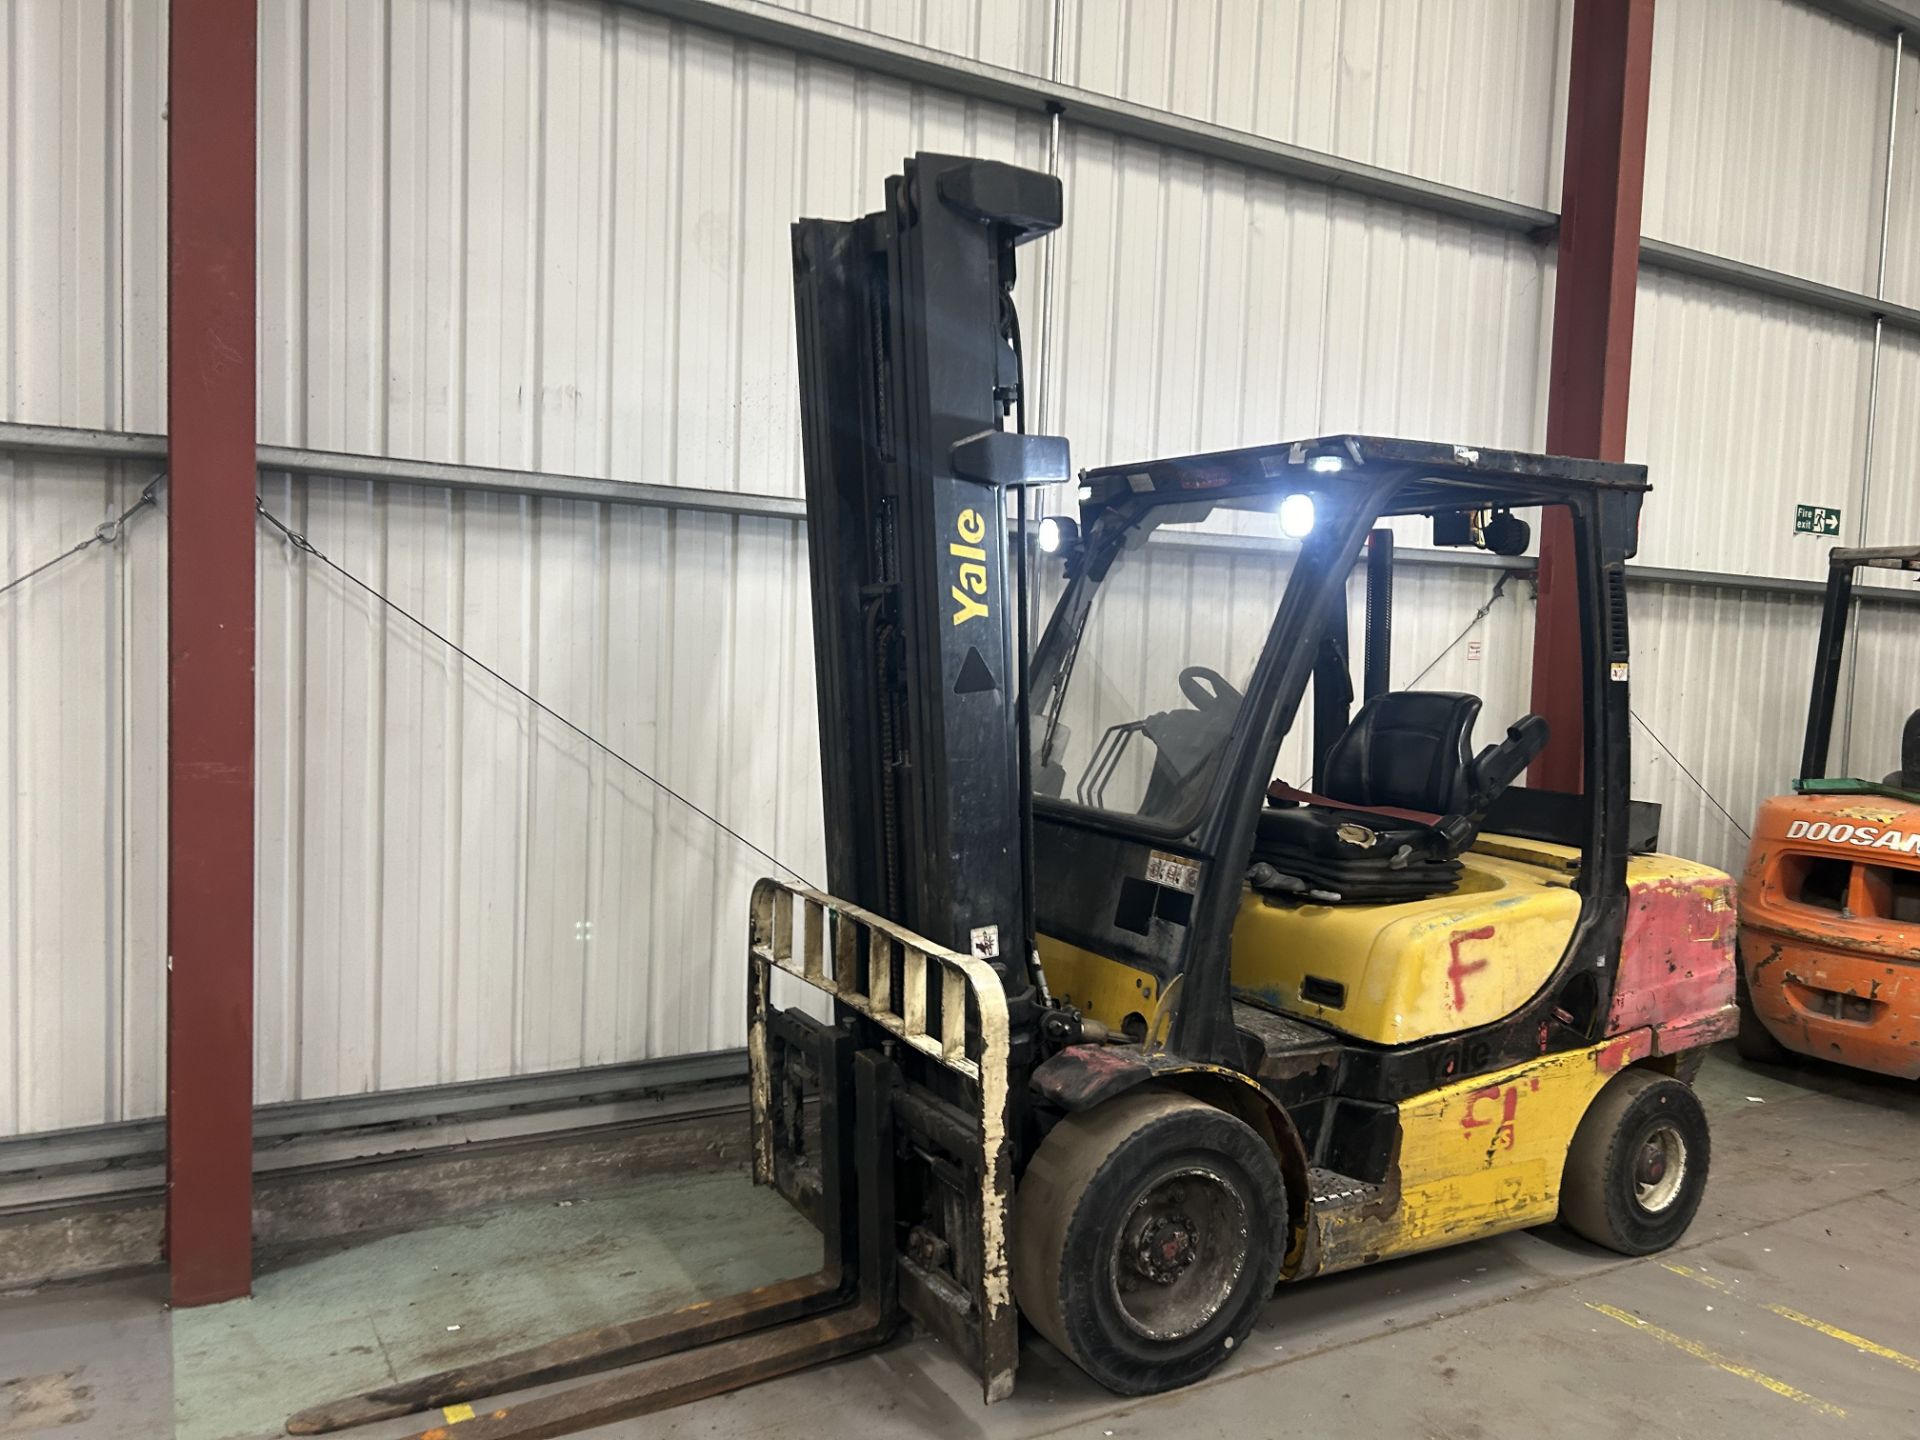 >>>SPECIAL CLEARANCE<<< DIESEL FORKLIFTS YALE GDP35VX - Image 5 of 6